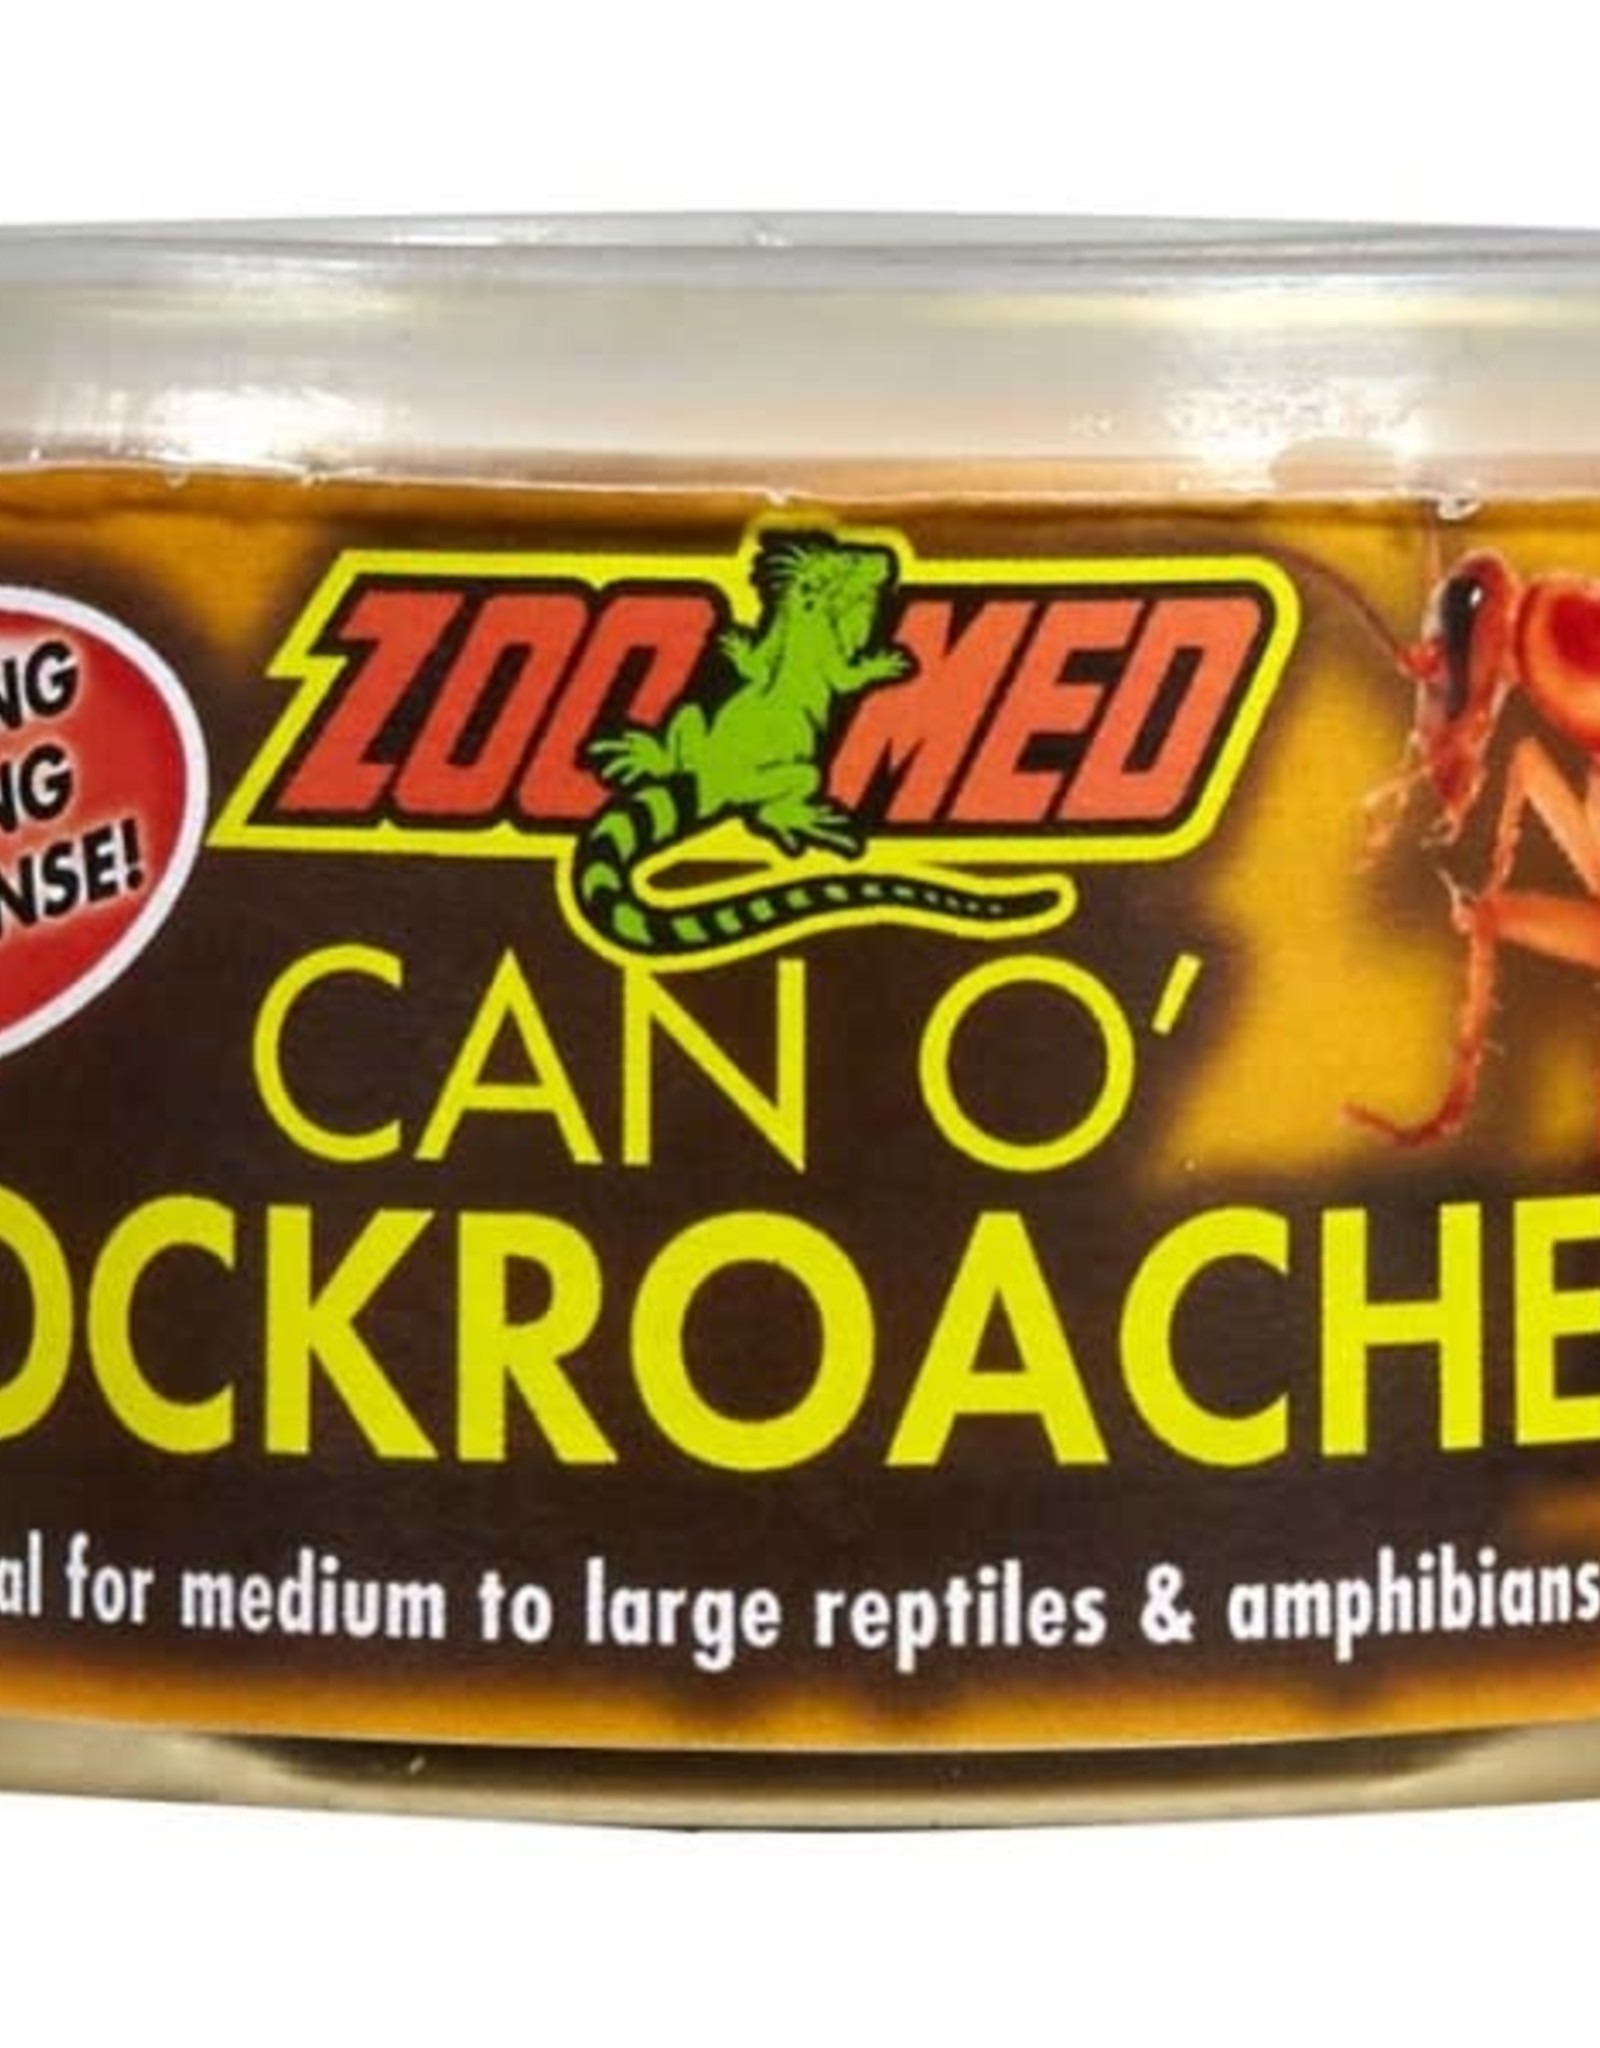 ZOO MED LABORATORIES, INC. ZOO MED ZM-147- CANNED FOOD- CAN O' COCKROACHES- 1.2 OZ